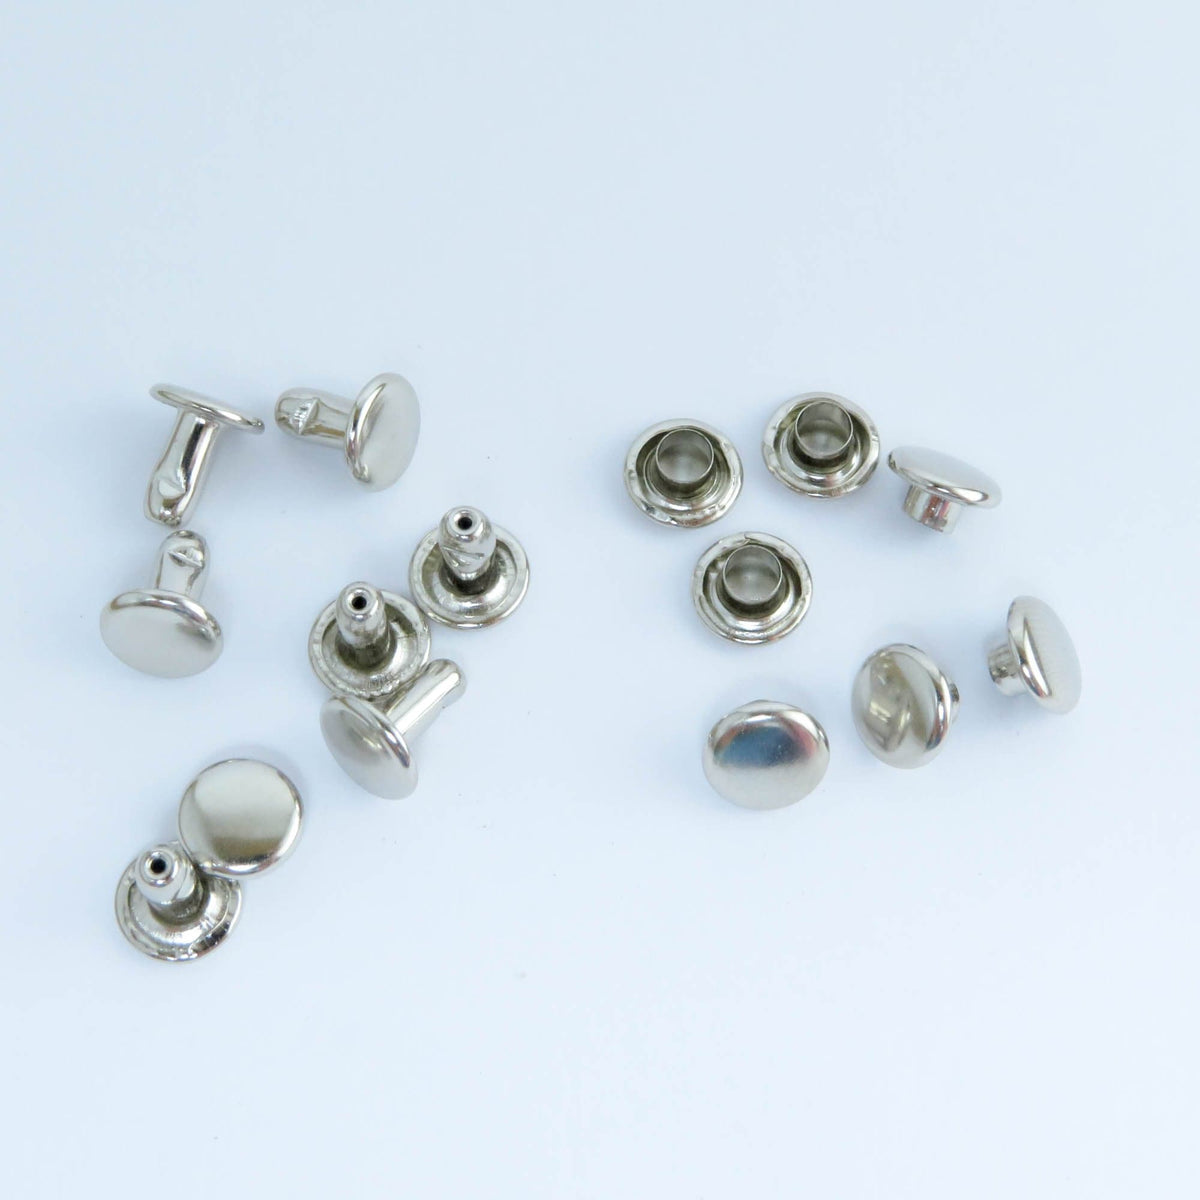 7 MM DOUBLE CAP RIVETS FOR LEATHER AND CRAFTS ATIQUE BRASS/NICKEL/BRASS/BLACK NICKEL AVAILABLE